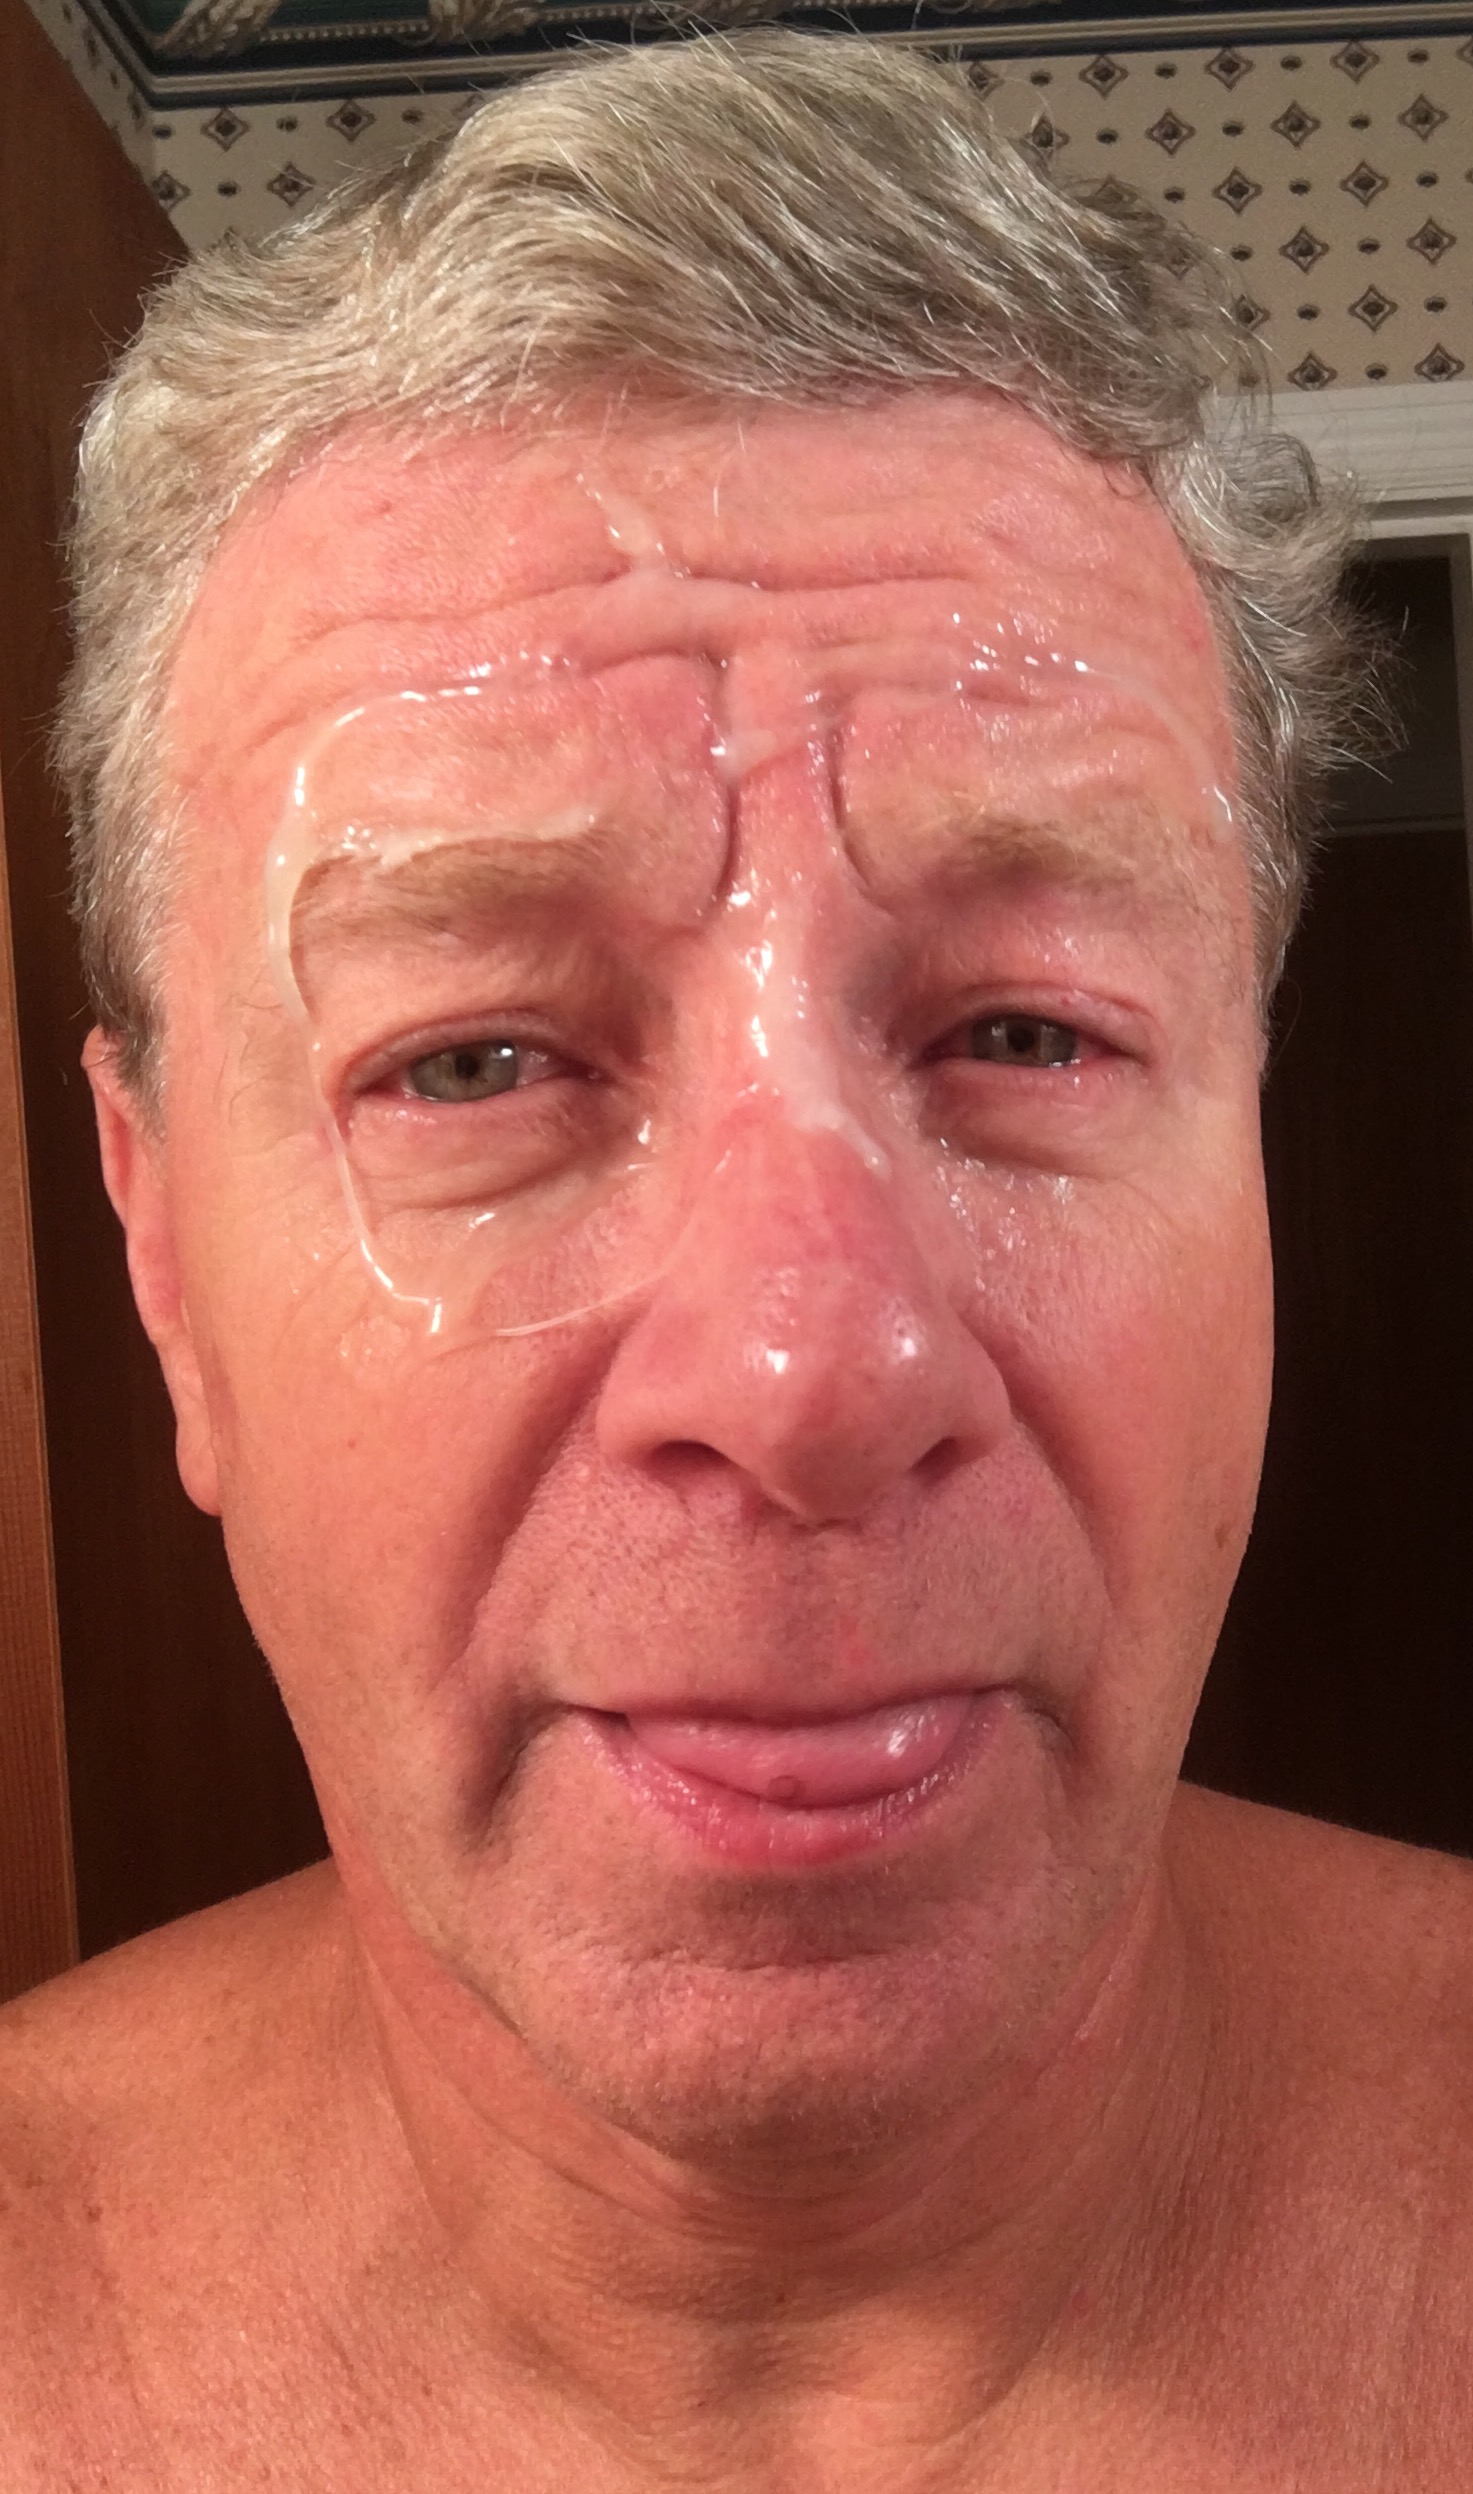 Sperm On Face Porn - Photojournalist Stewart Bowman with Sperm on His Face - Amateur Gay Porn  Pictures And Stories